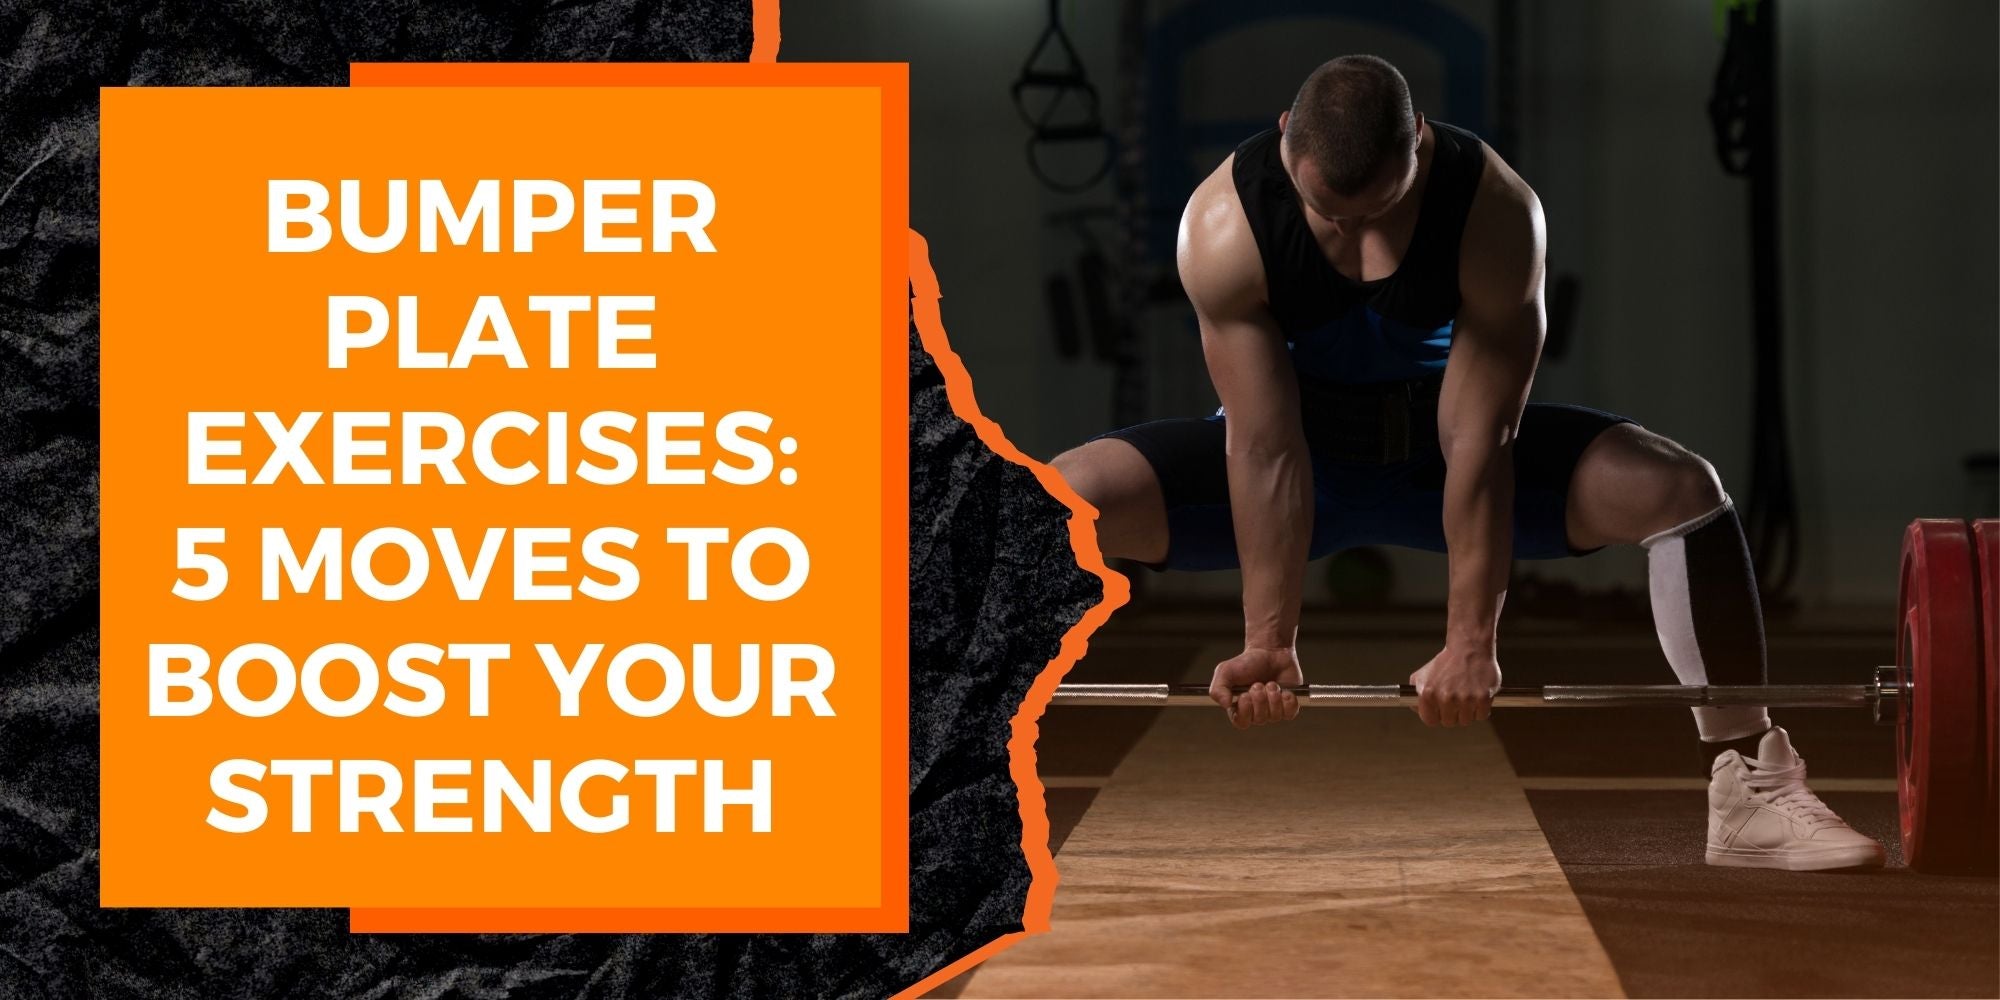 Bumper Plate Exercises for Intermediate Lifters: 5 Moves to Boost Your Strength